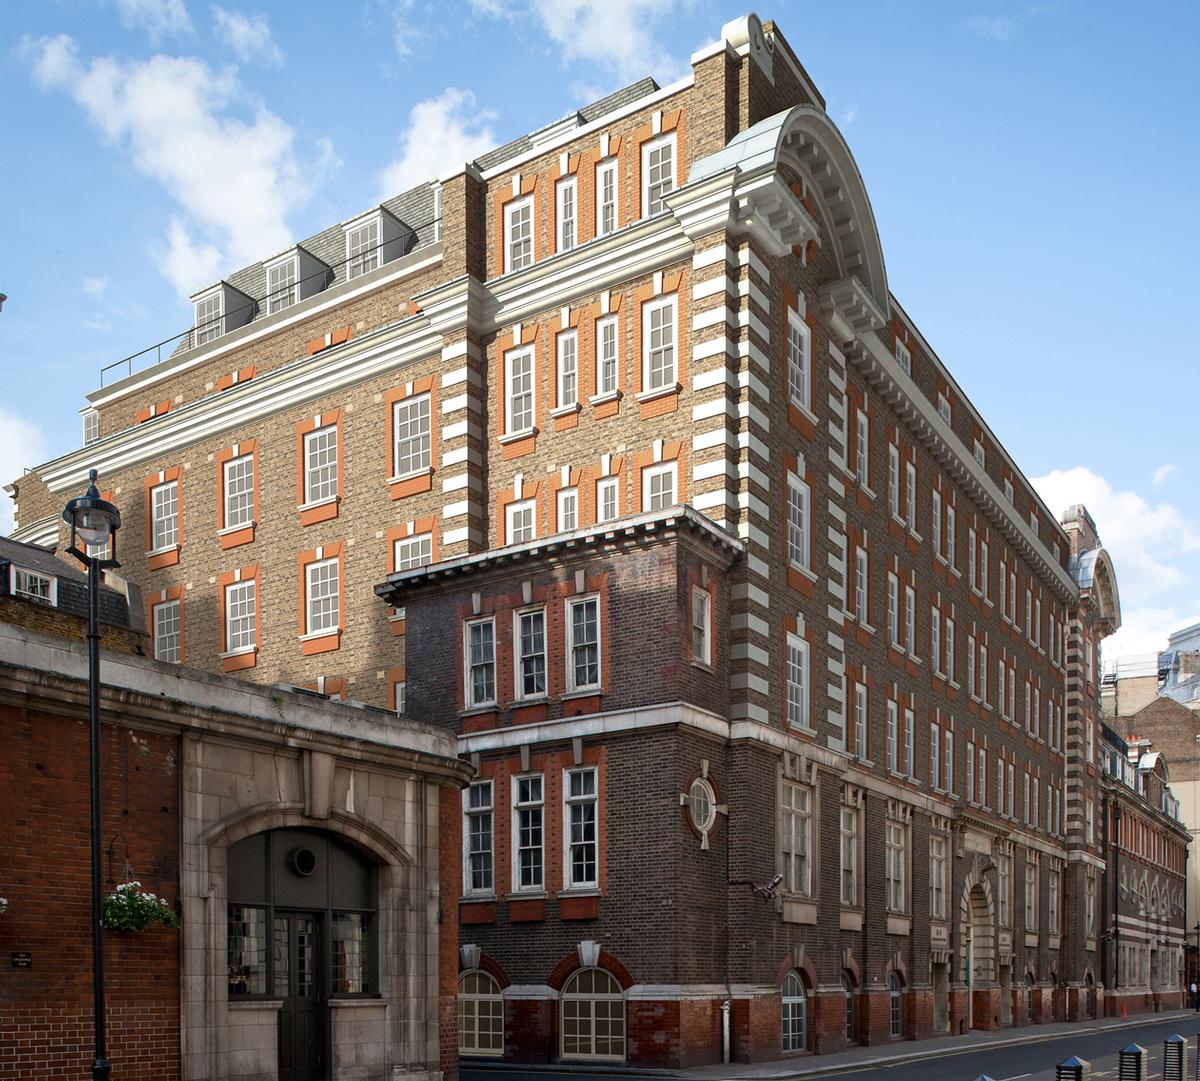 The completed hotel will be seven-storeys high and will retain the grand Edwardian Imperial red brick and stone facade